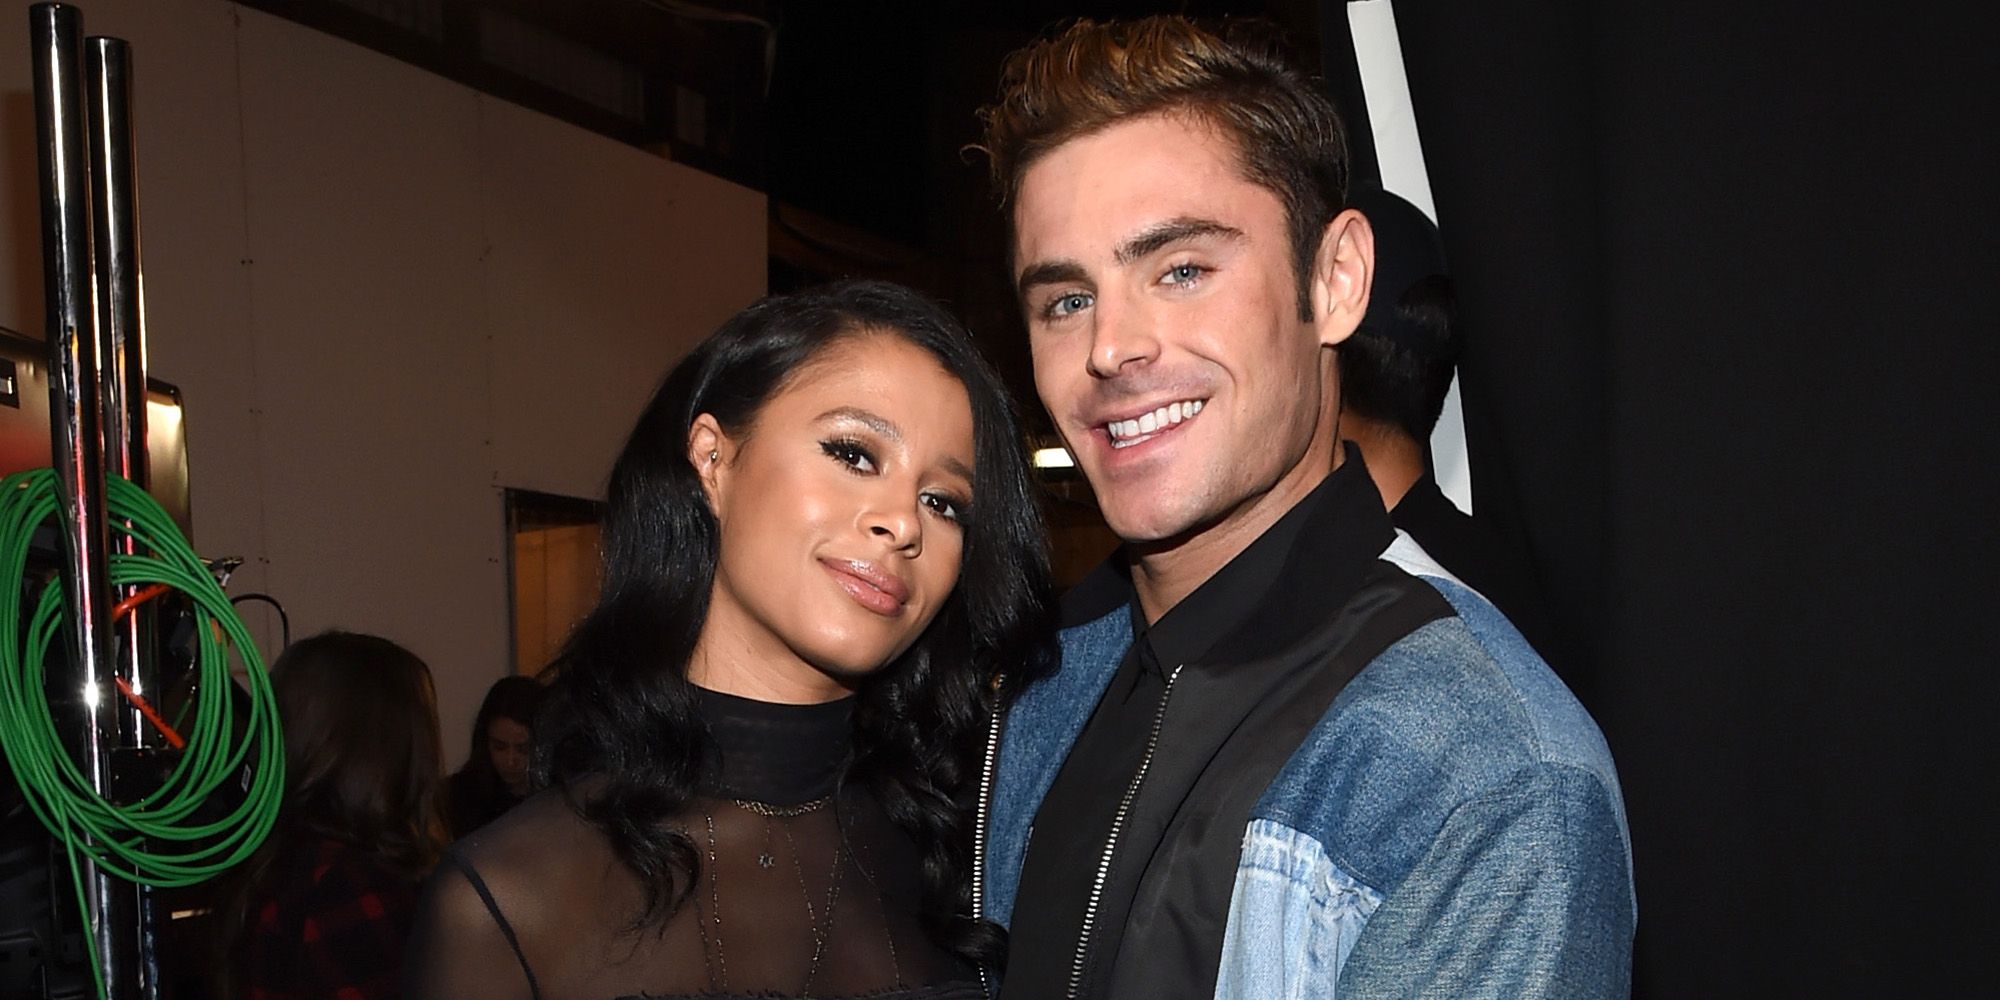 Zac Efron & Sami Miro Still Going Strong, Spend Sunday Together